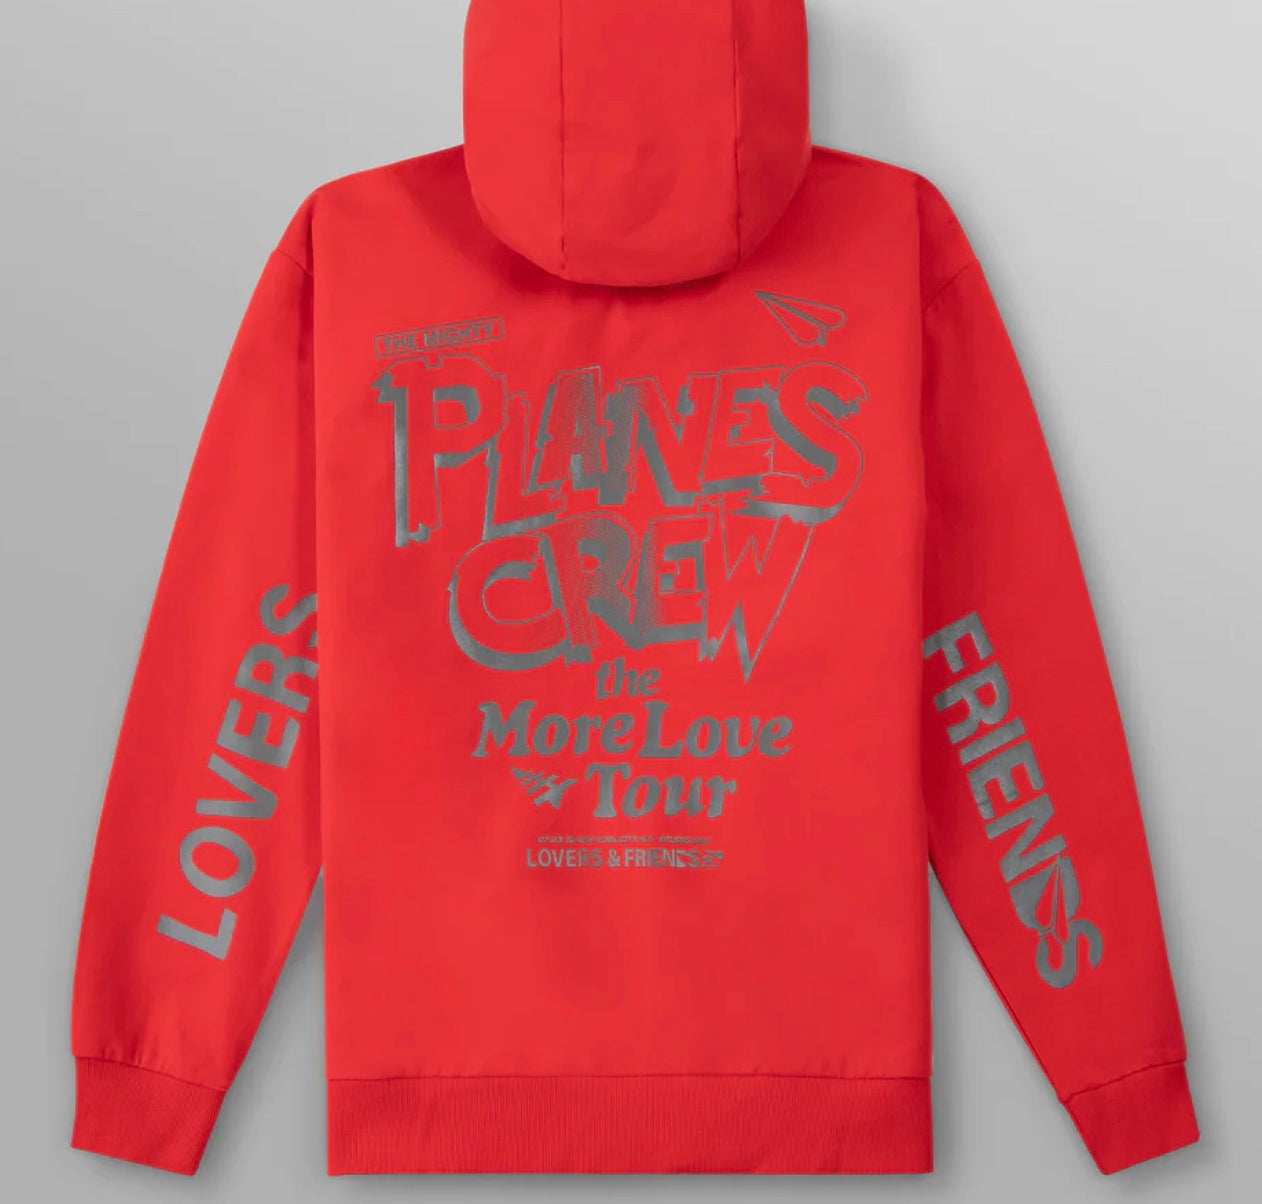 Paper planes more love tour hoodie